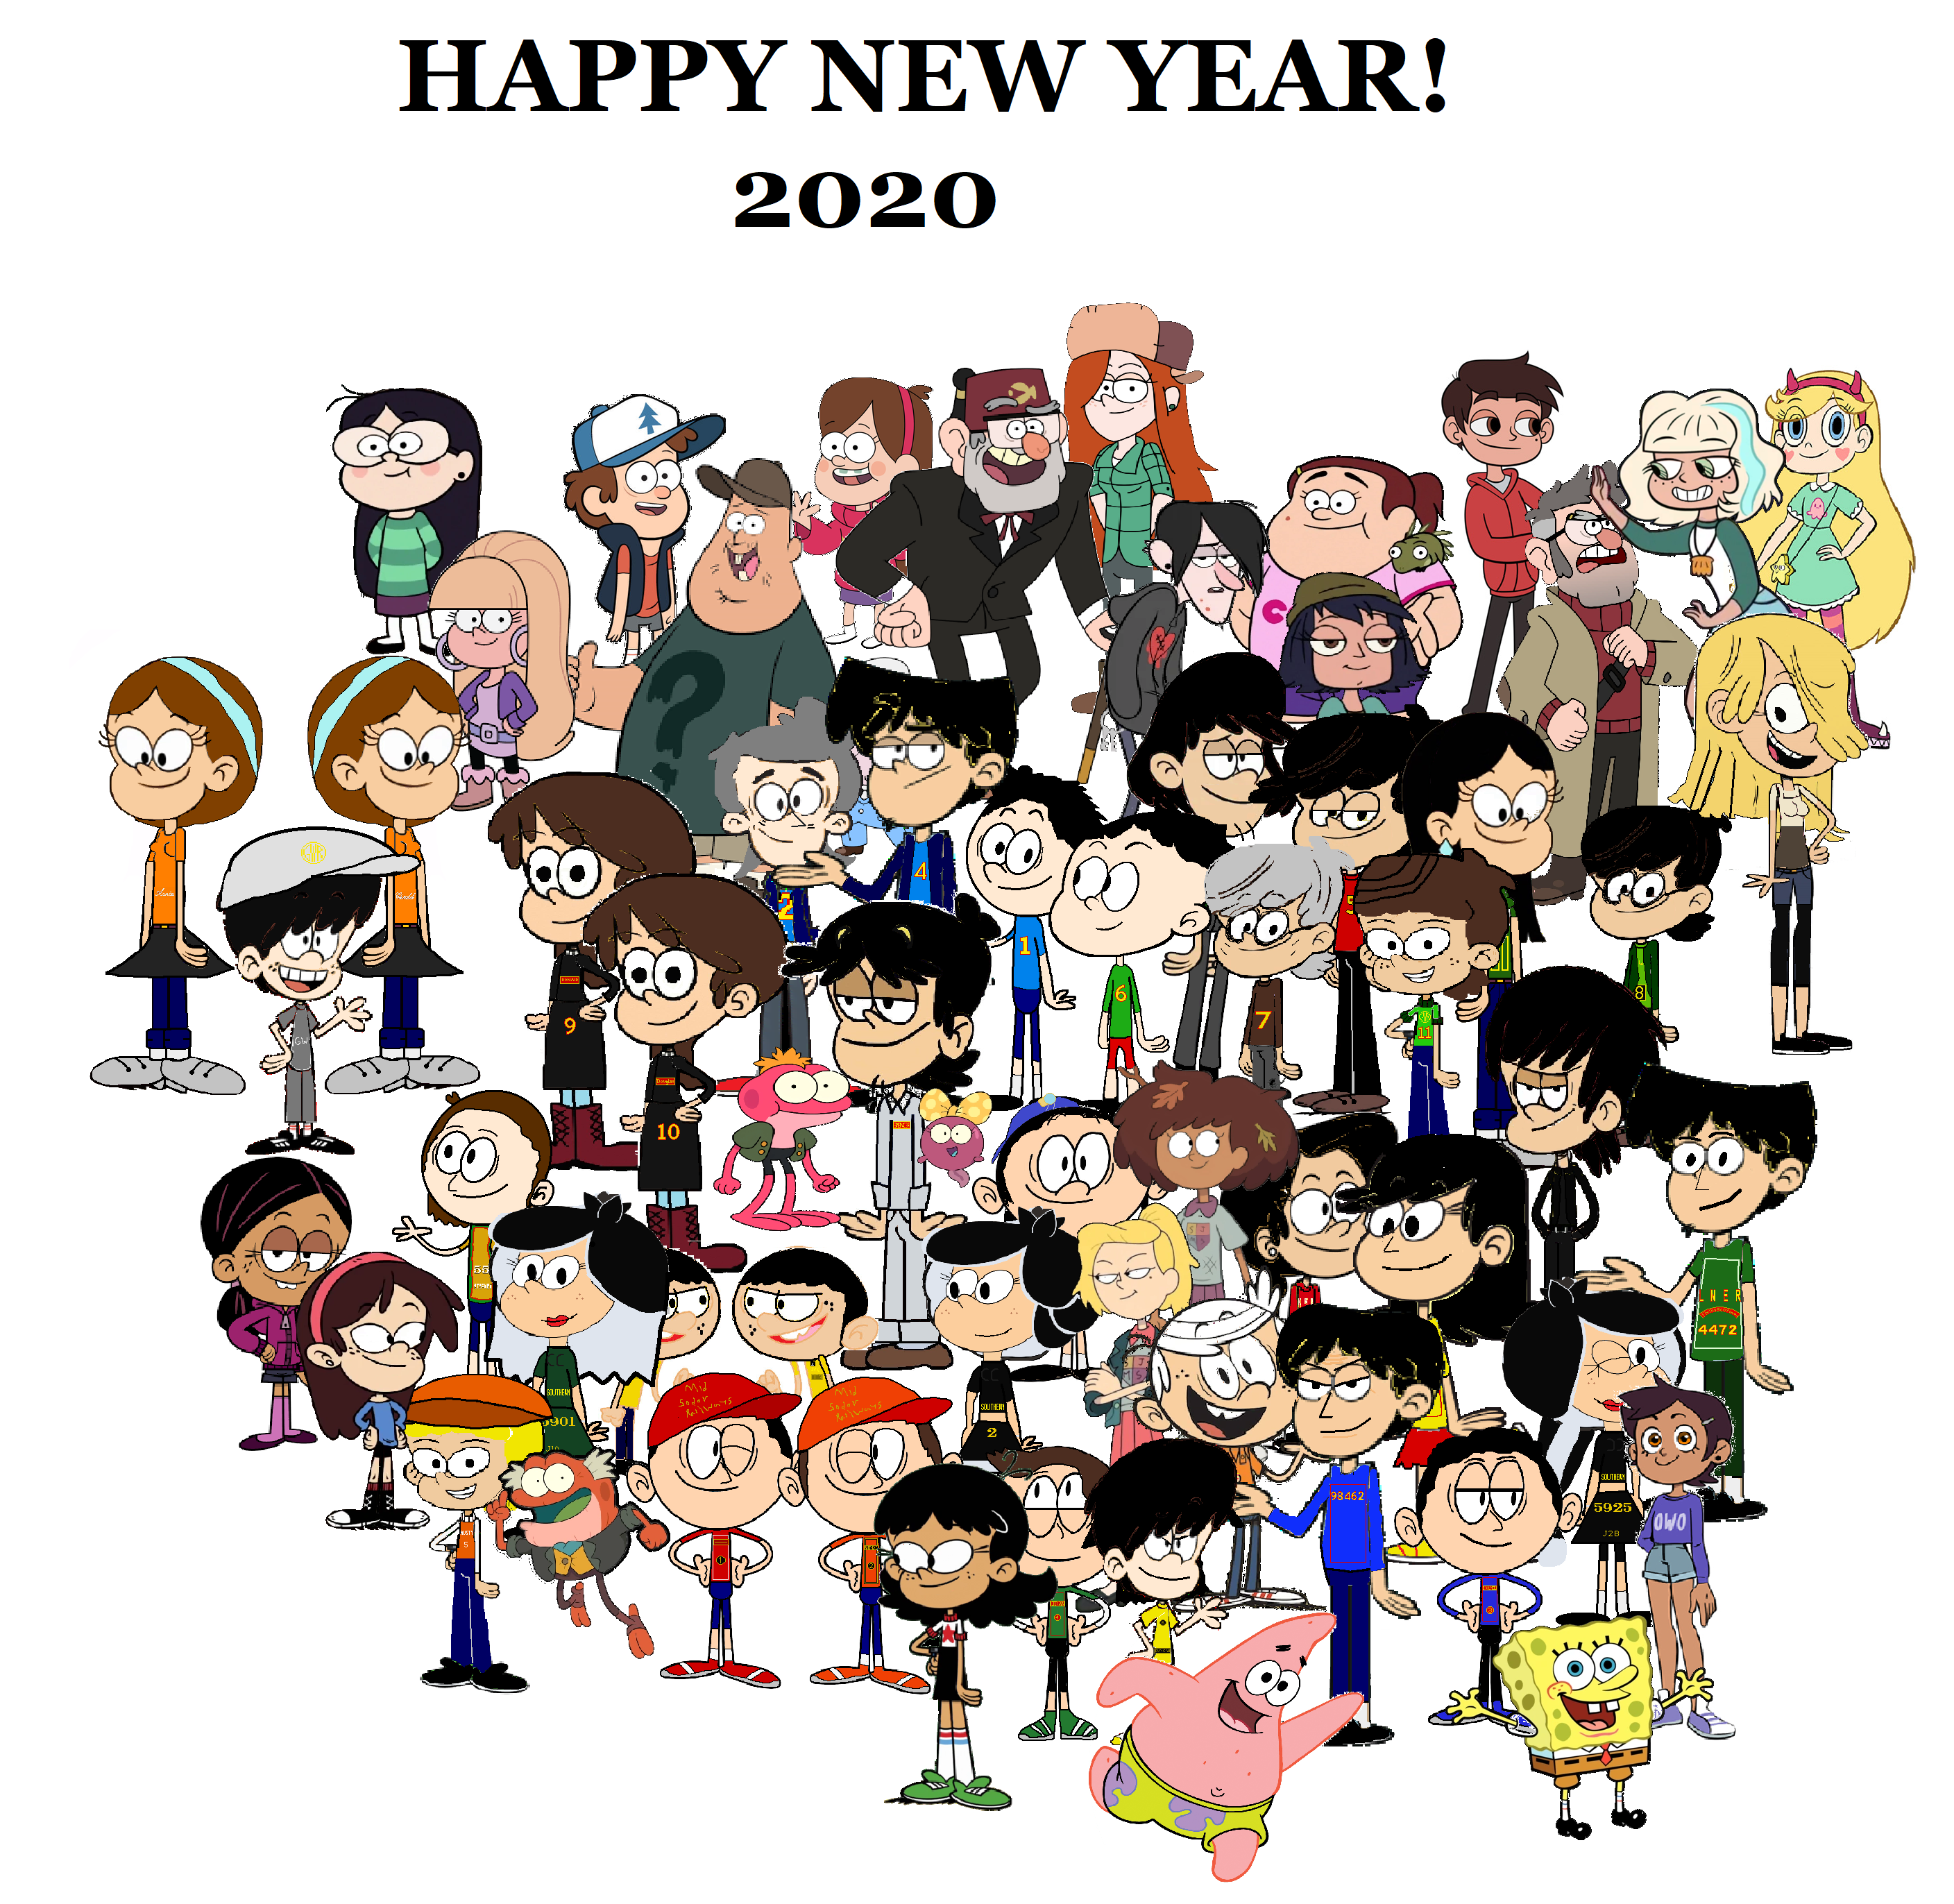 Happy New Year From The Cartoon Characters by WilliamsAmazingArtX on  DeviantArt